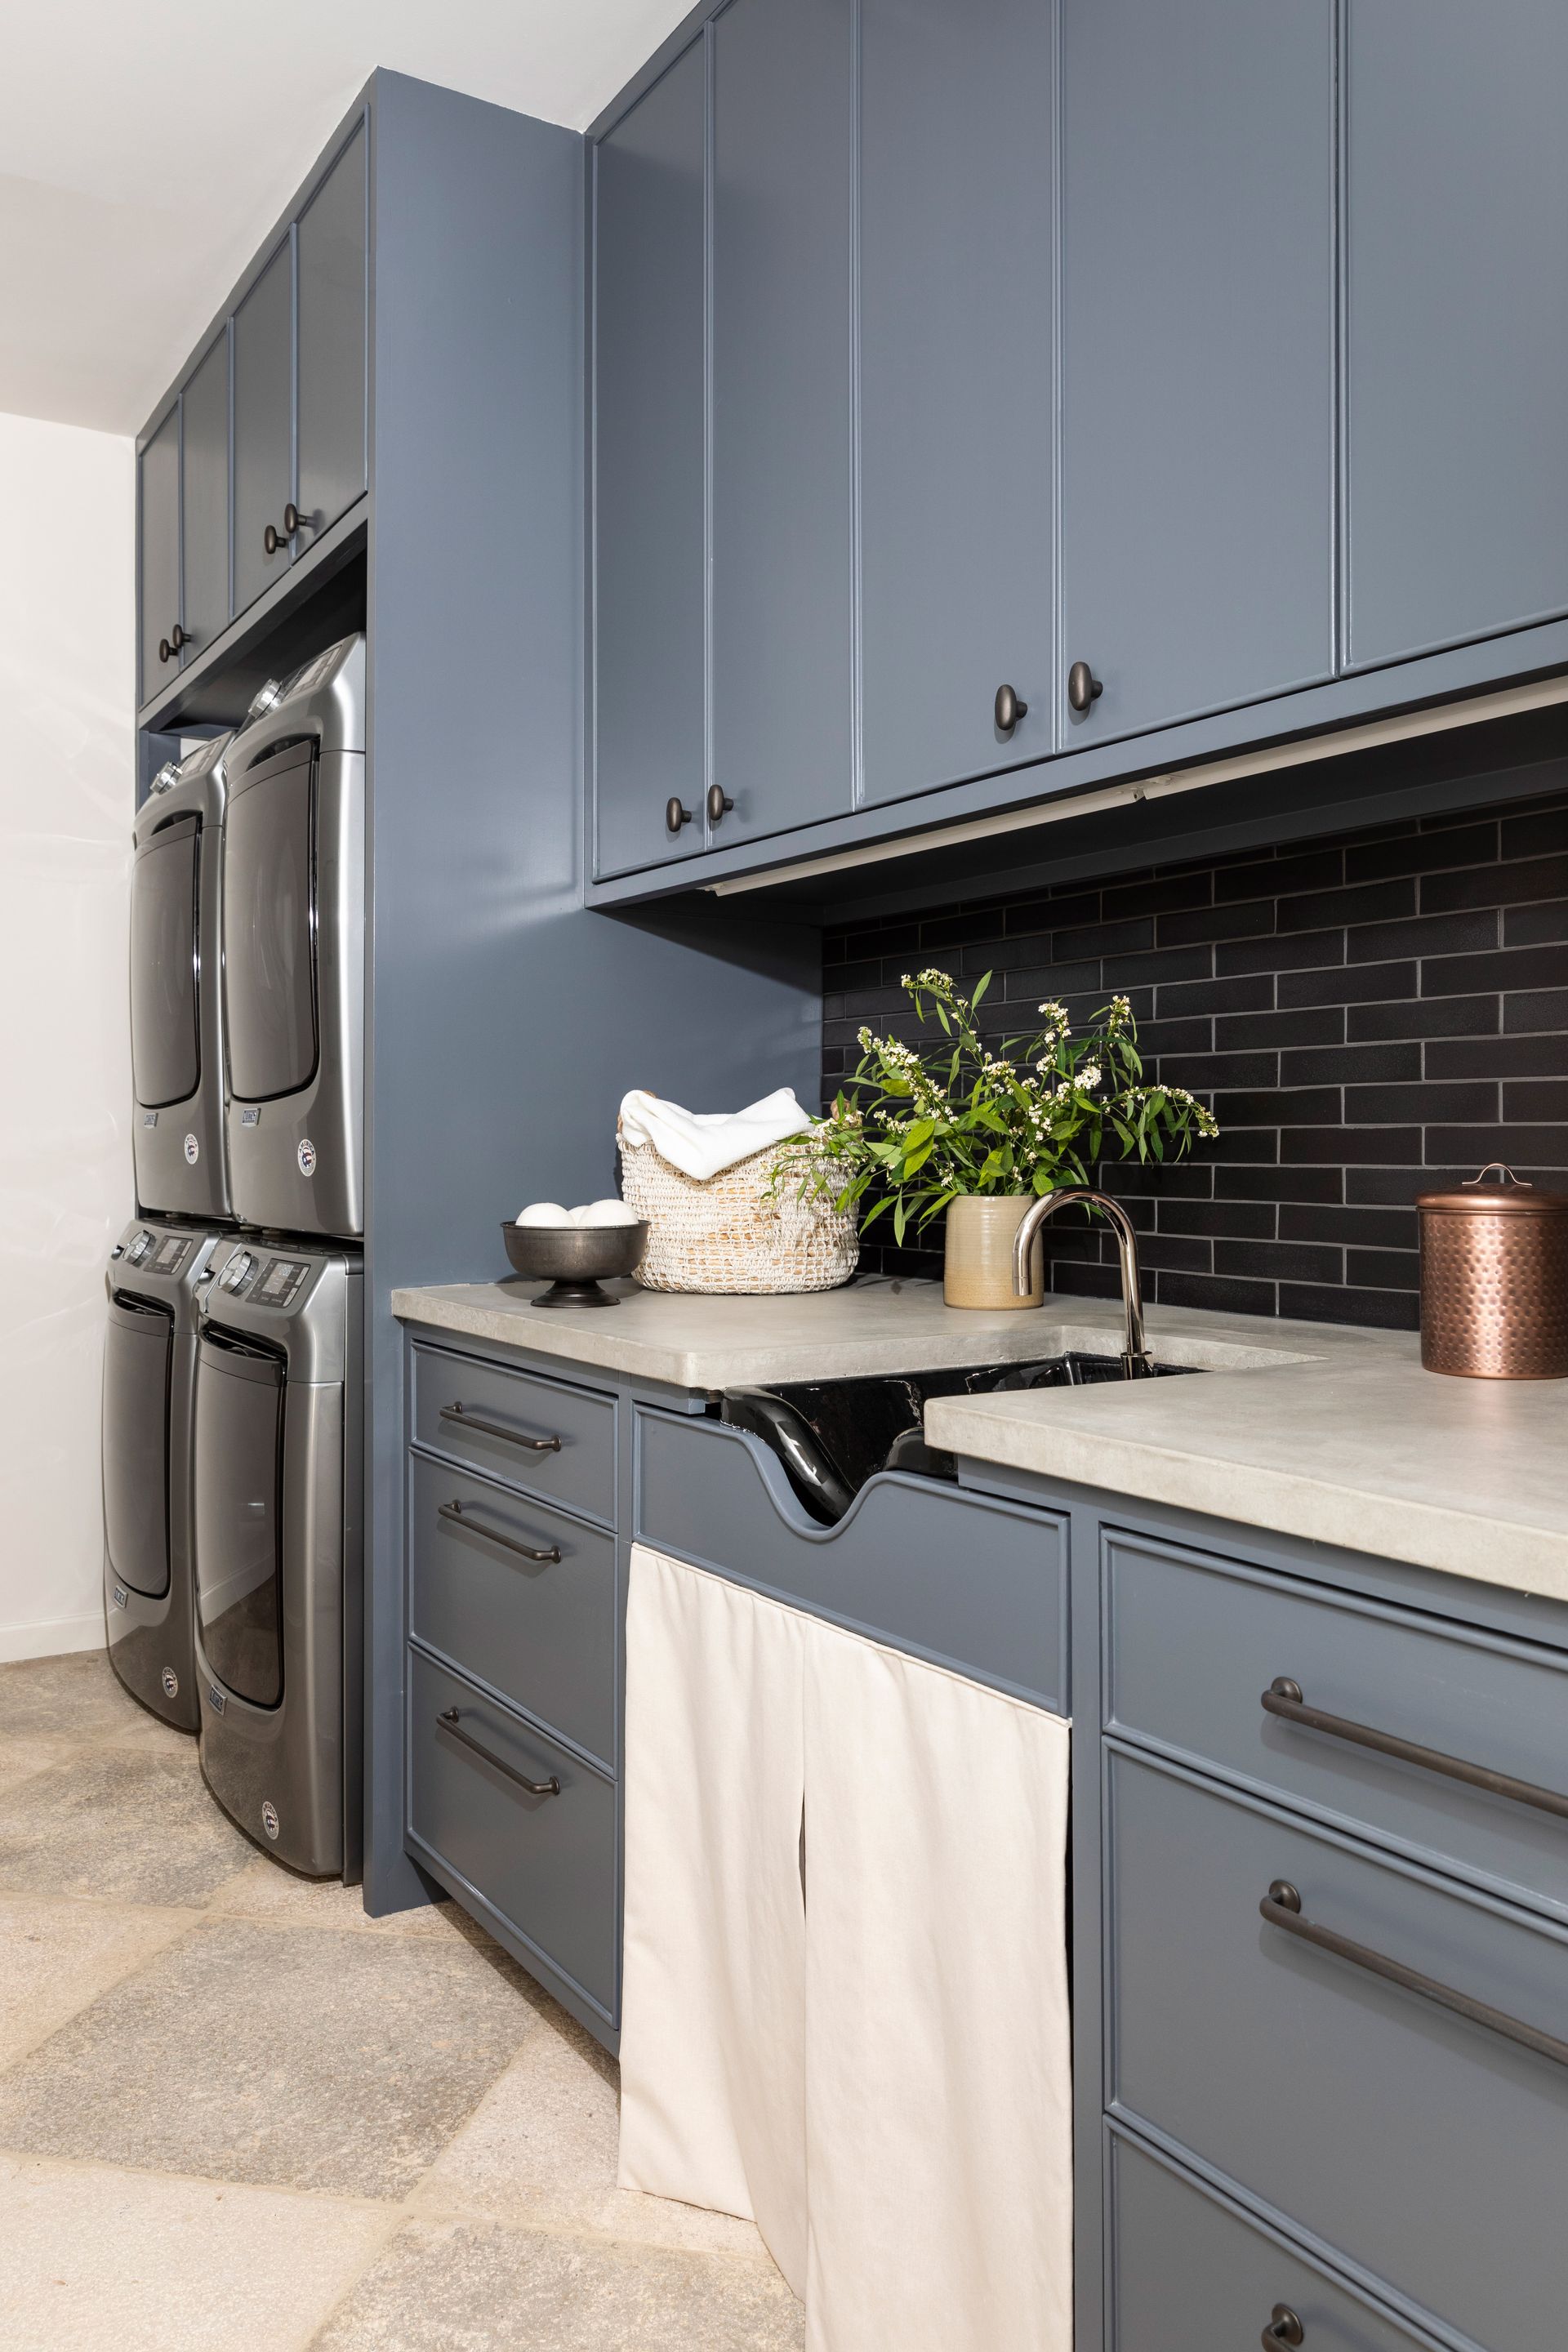 Laundry room ideas – 10 ways to design a space that balances form and ...